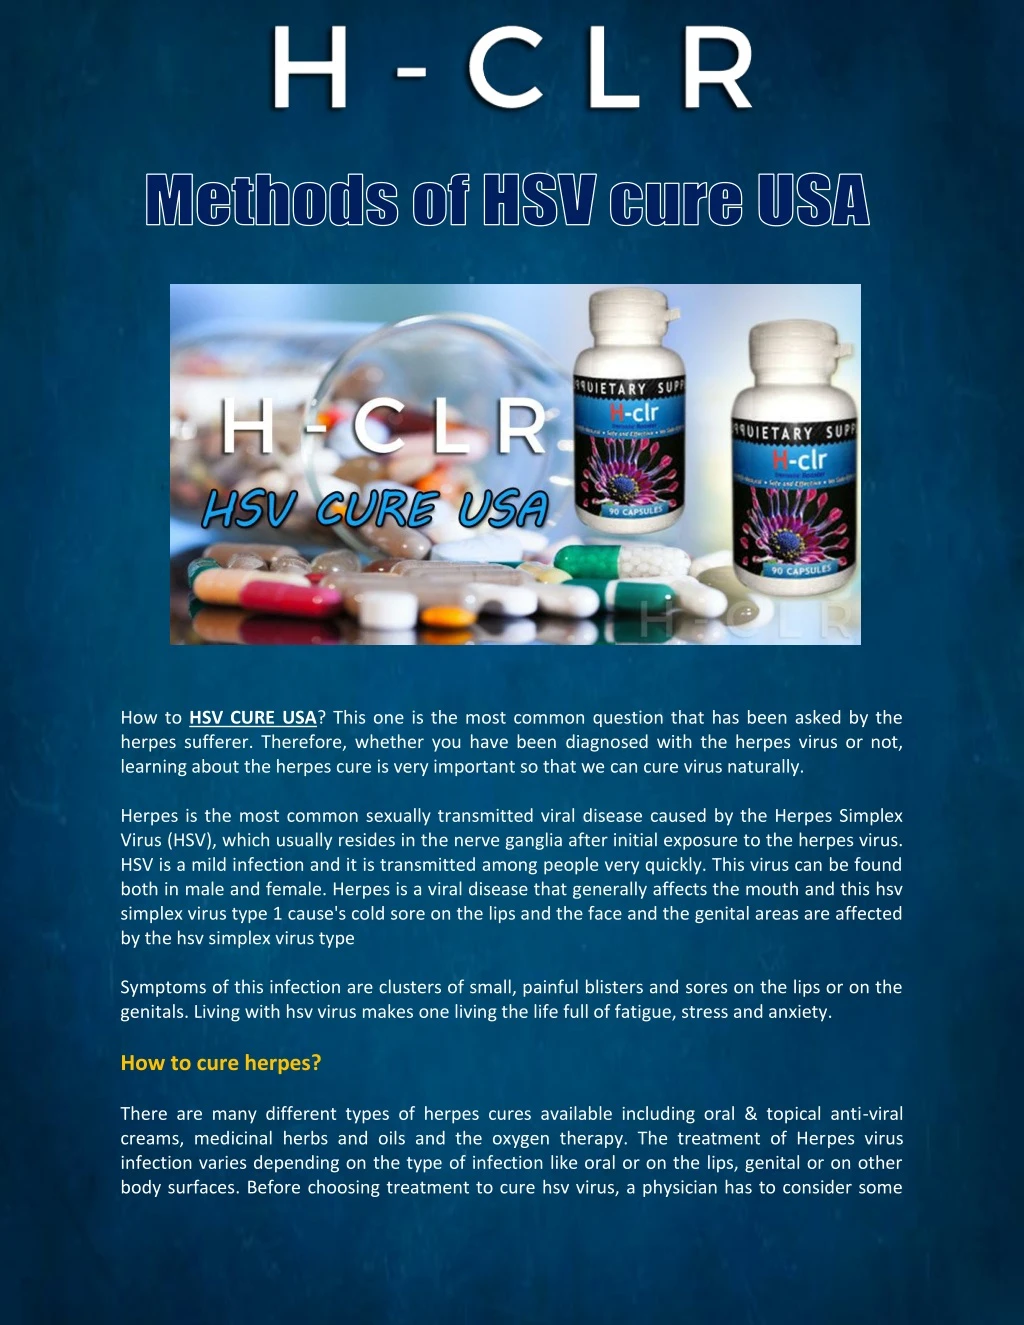 how to hsv cure usa this one is the most common